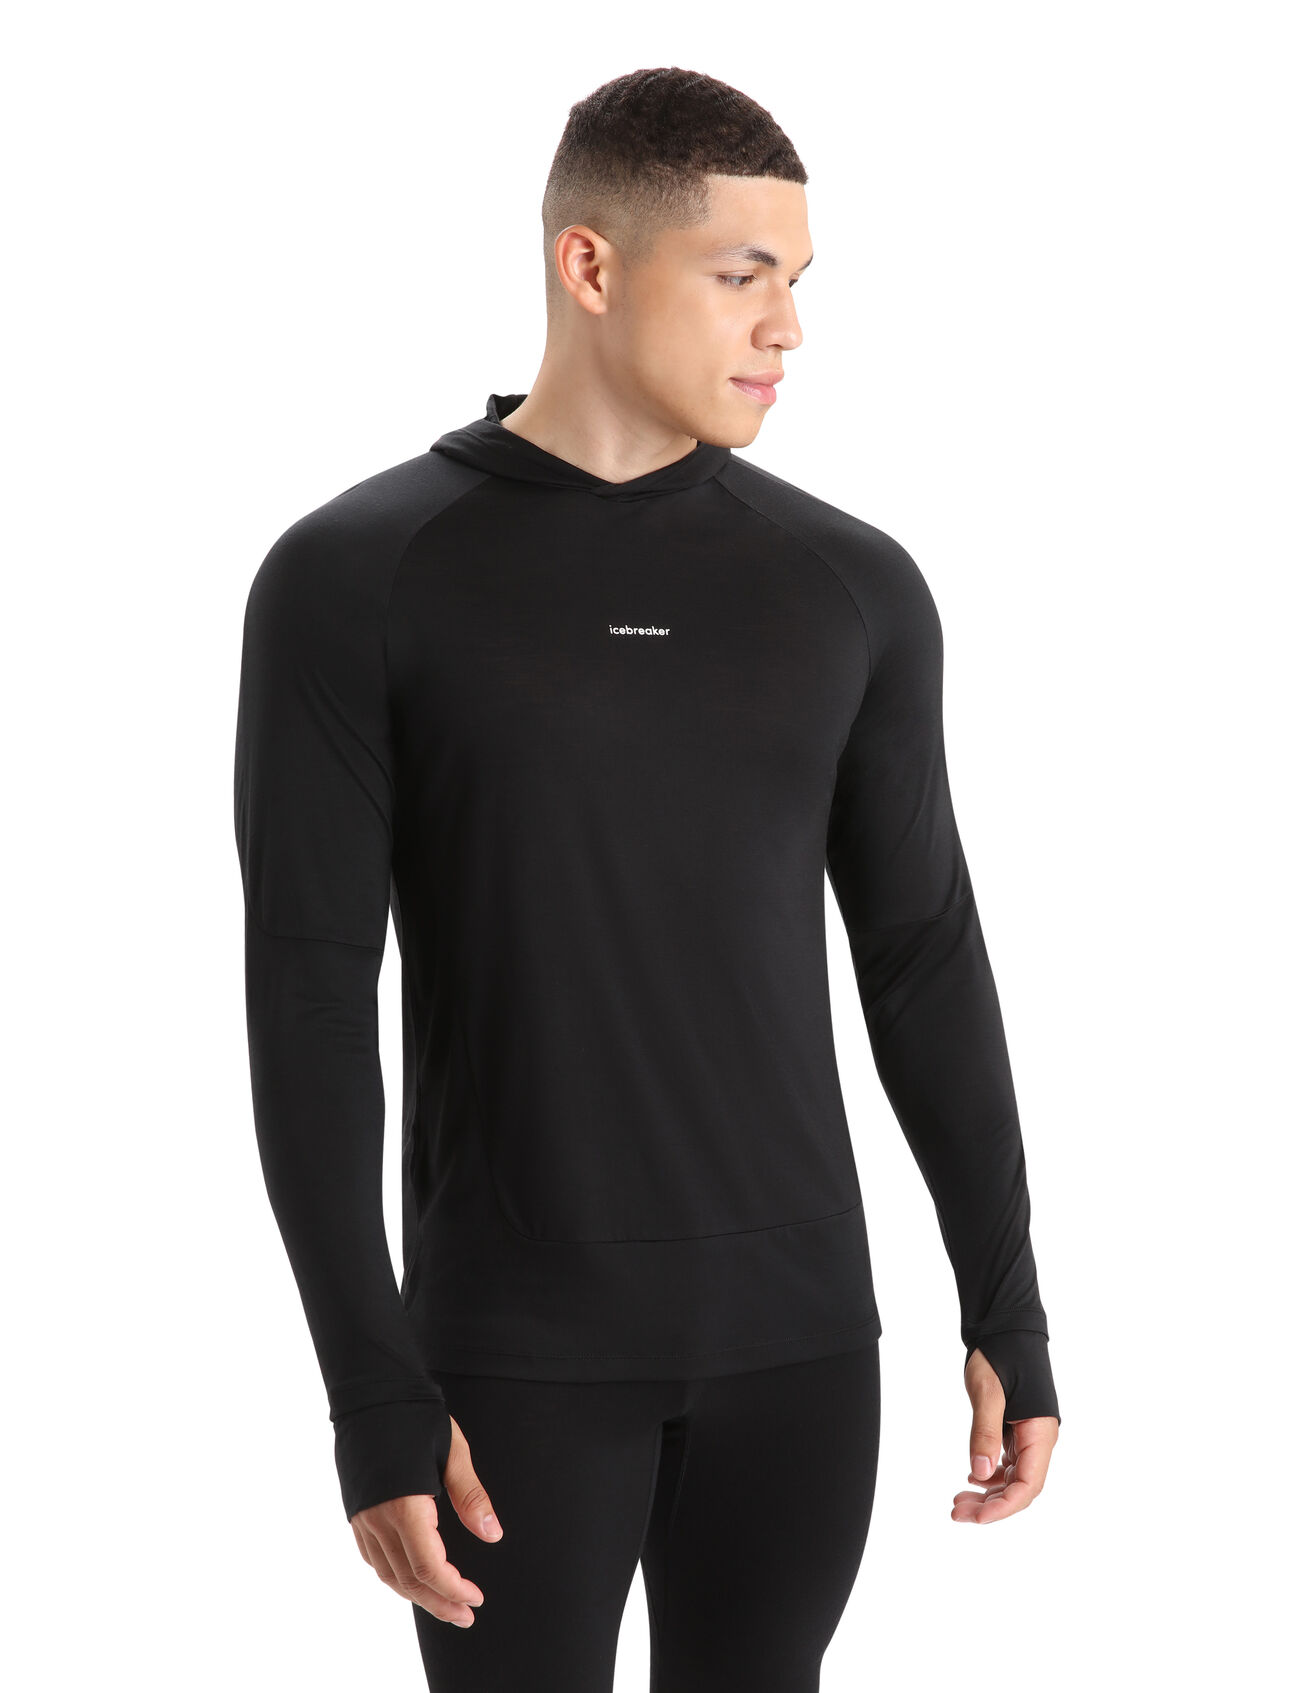 Mens 125 Cool-Lite™ Merino Blend Sphere Long Sleeve Hoodie A lightweight and breathable performance hoodie designed for aerobic days outside, the Cool-Lite™ Hoodie features our moisture-wicking Cool-Lite™ merino jersey fabric.